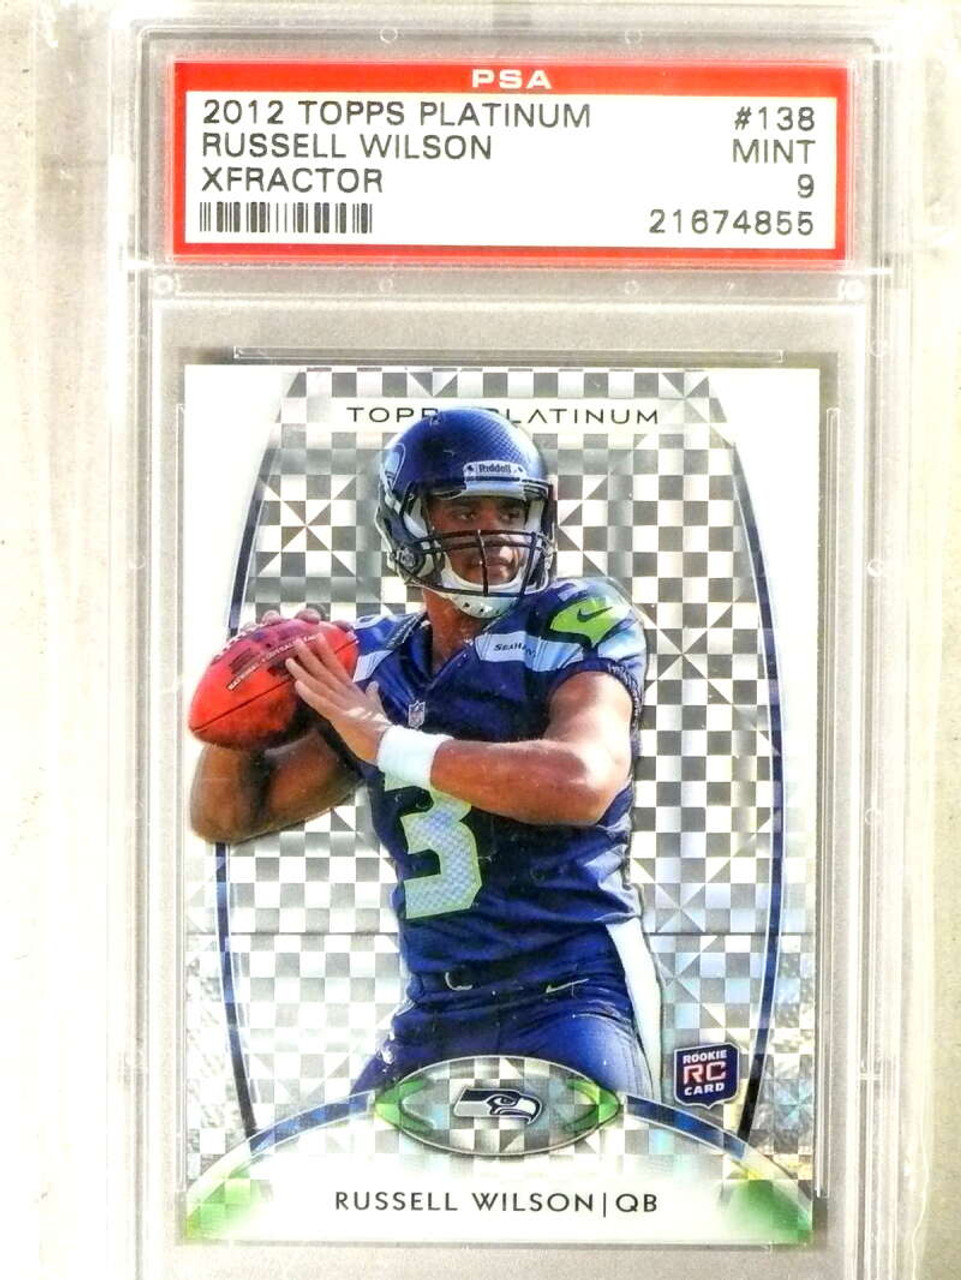 Russell Wilson baseball card from a minor league game I went to in 2011 :  r/Seahawks